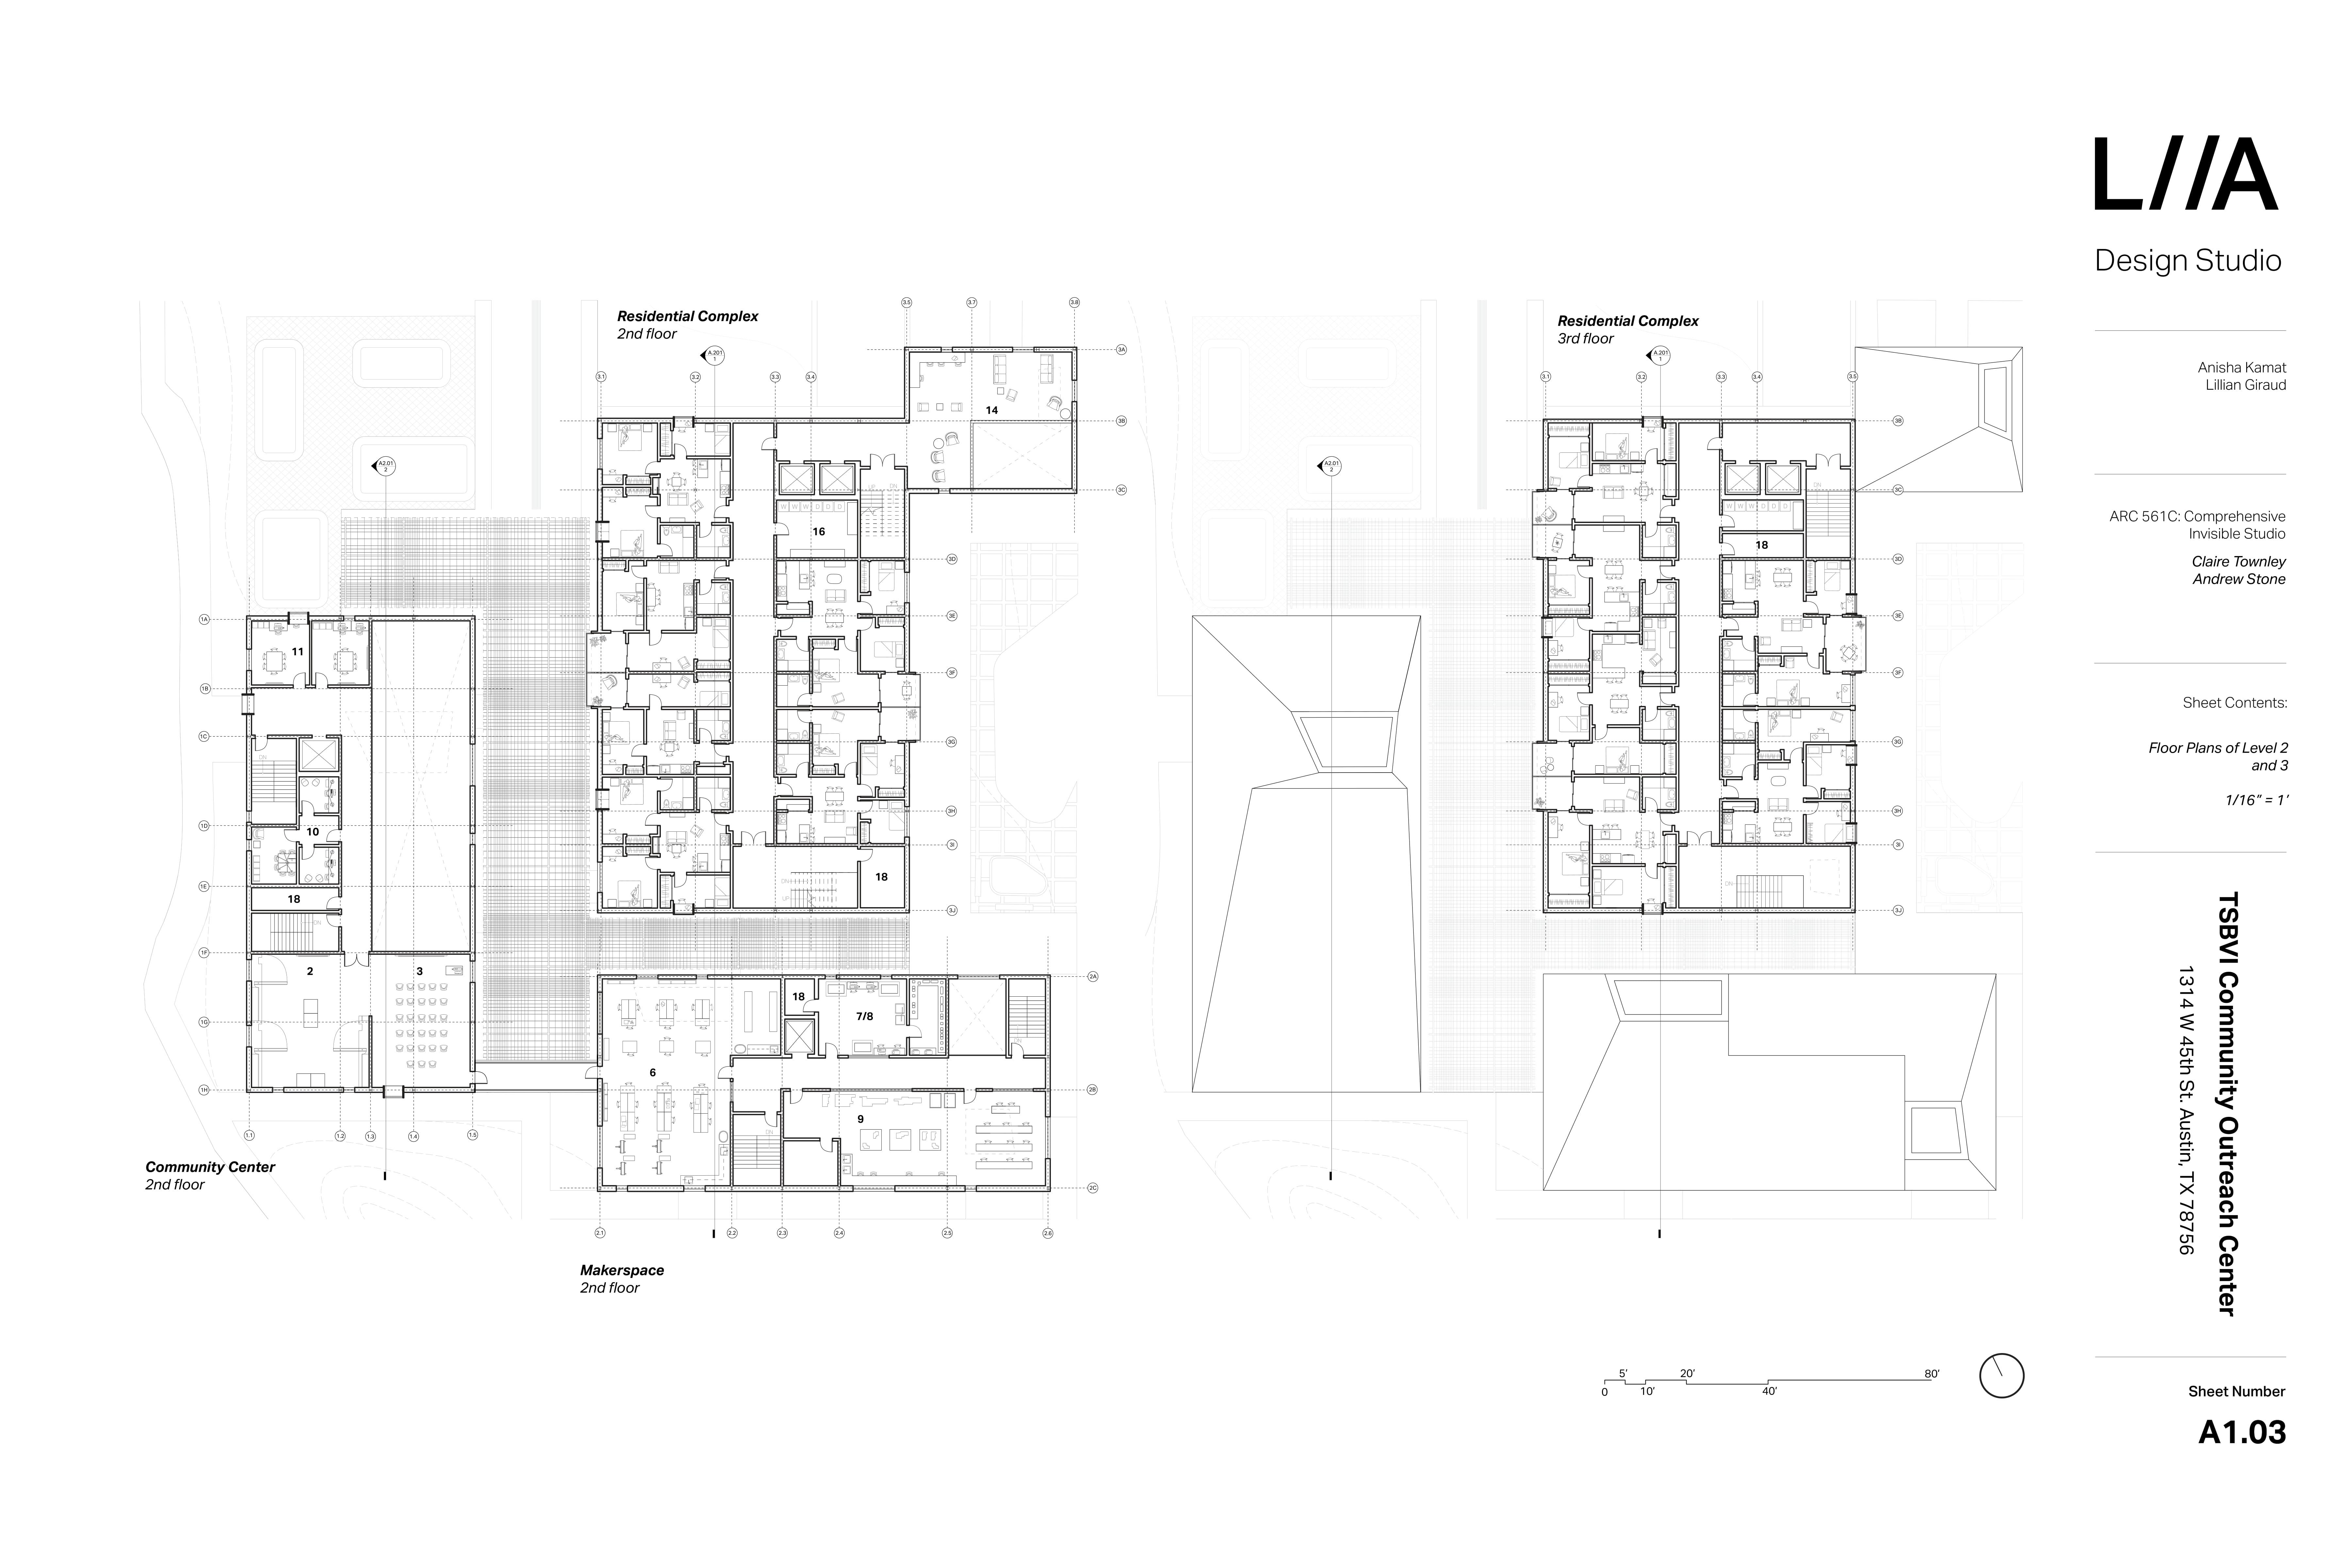 Floorplans of Level 2 and Level 3 of Anisha Kamat and Lillian Giraud's proposal for the Texas School for the Blind and Visually Impaired